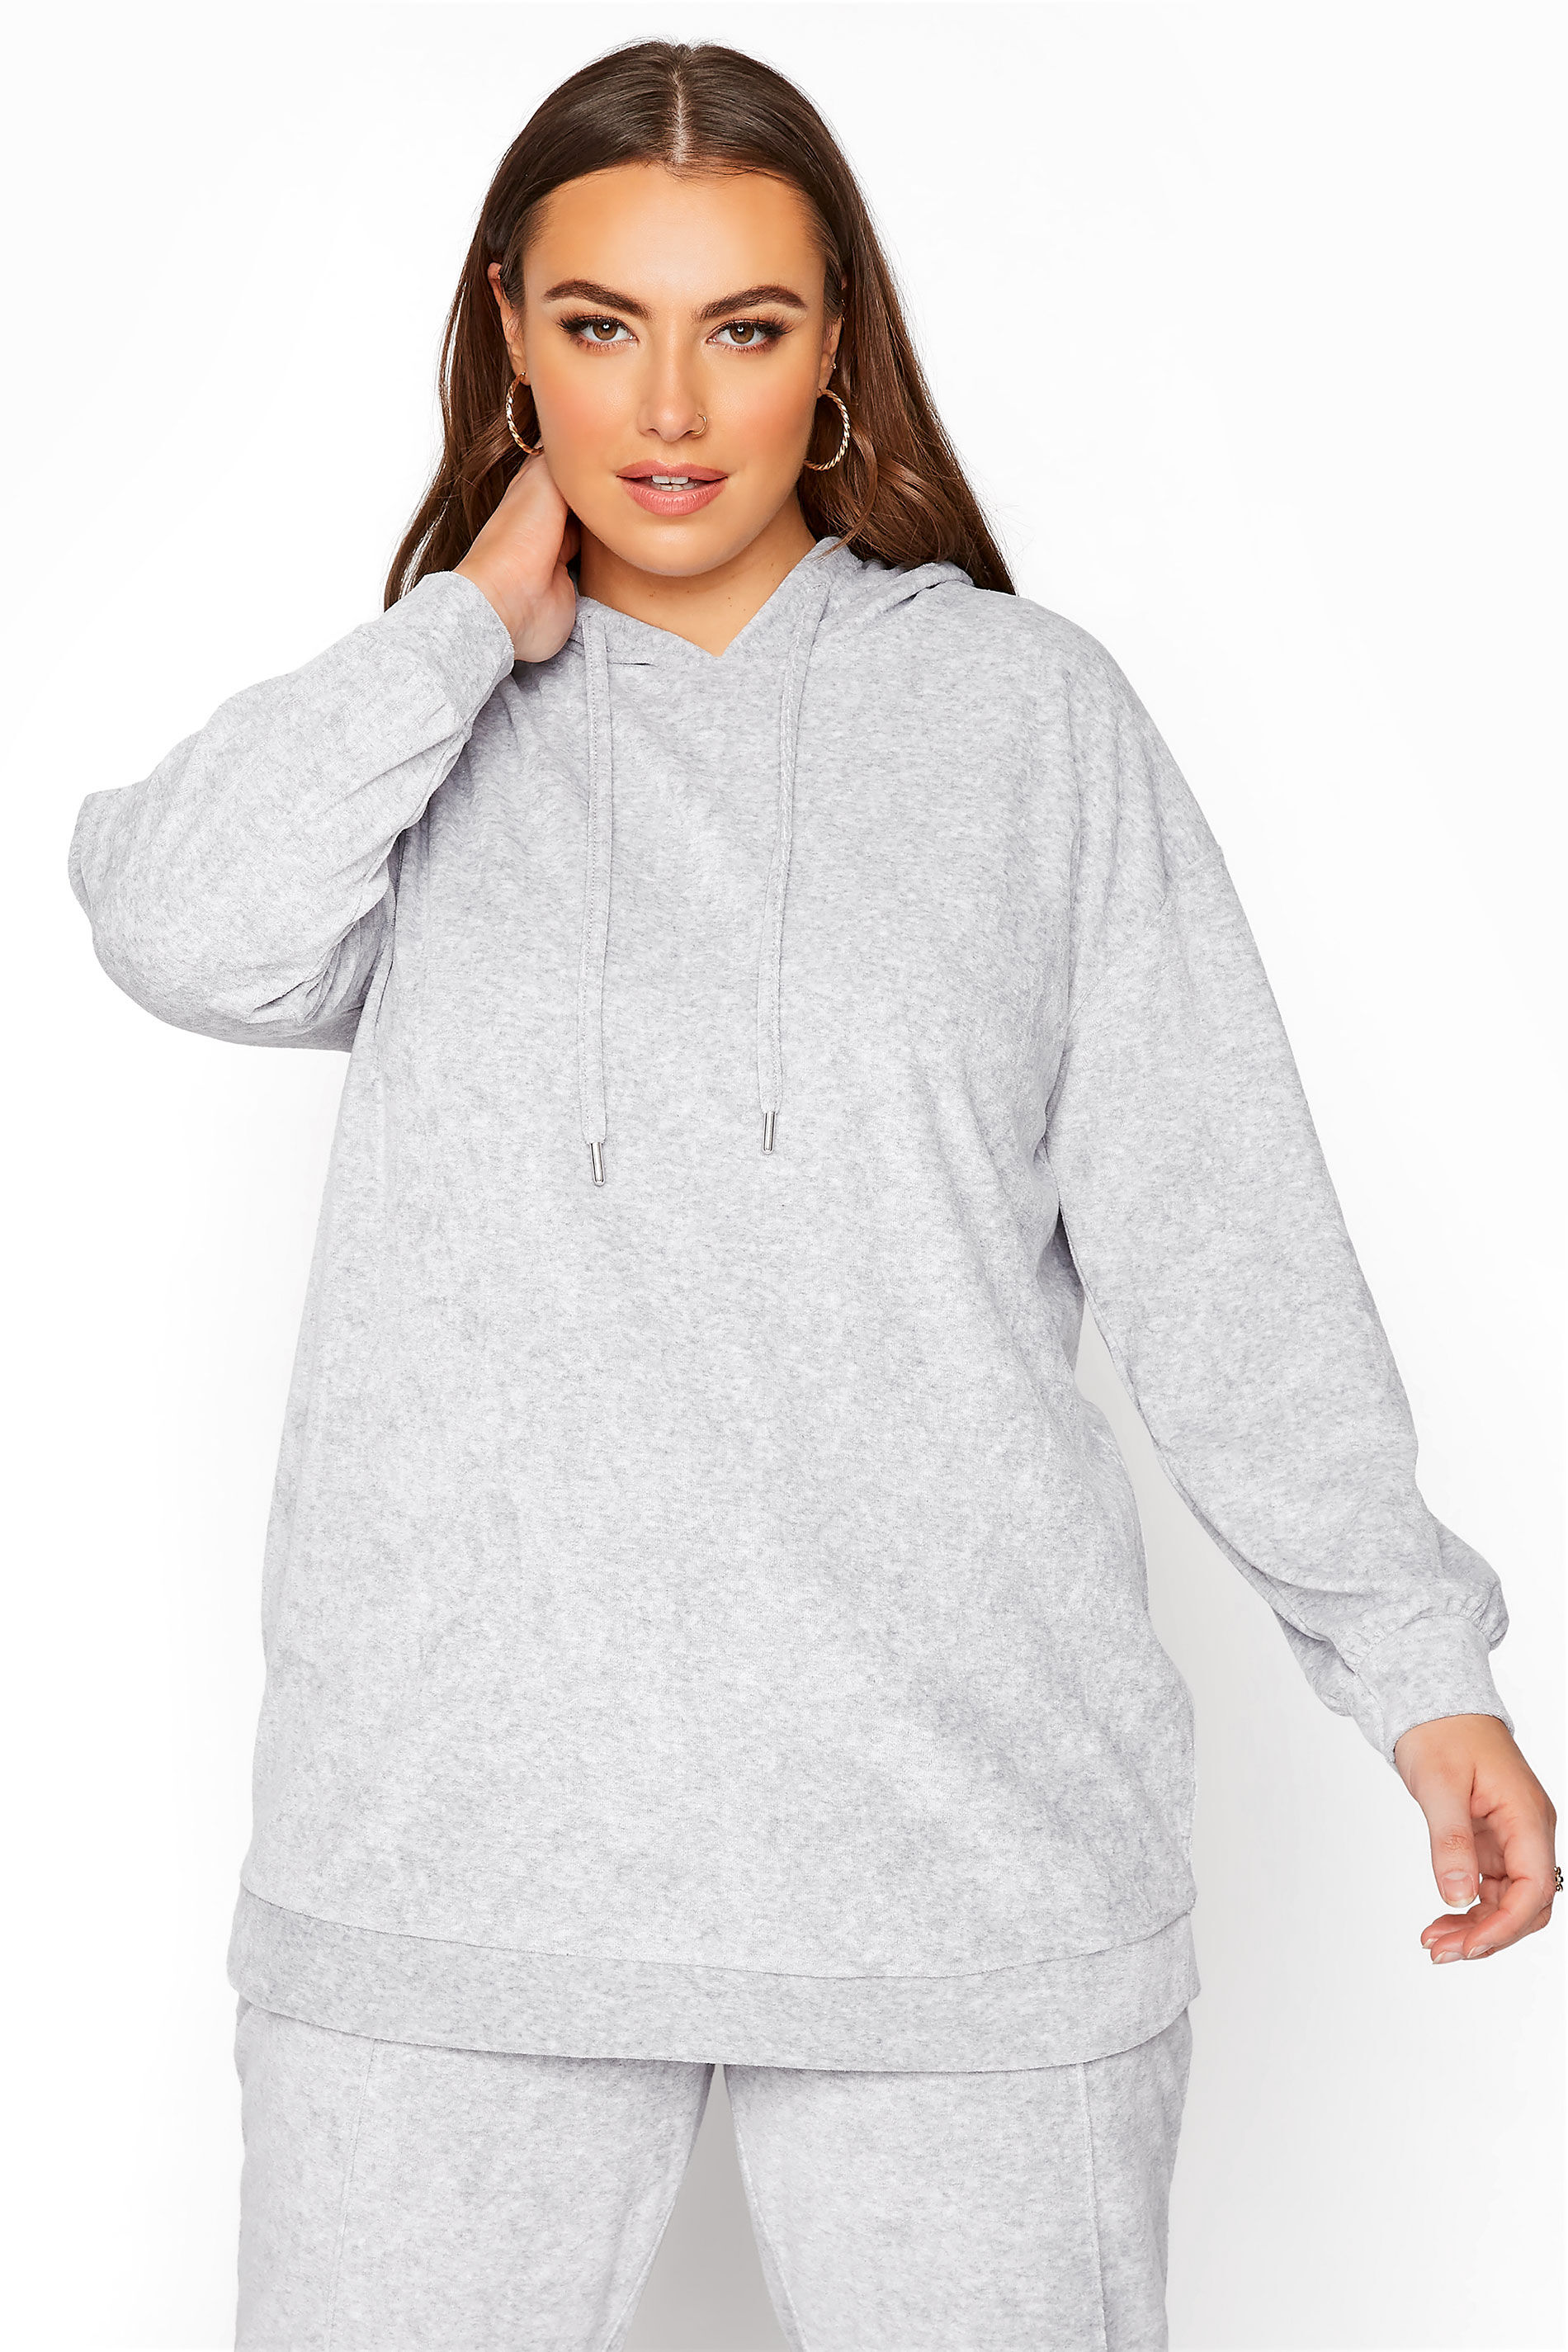 Yours Clothing Plus size grey marl velour sweat hoodie 22-24